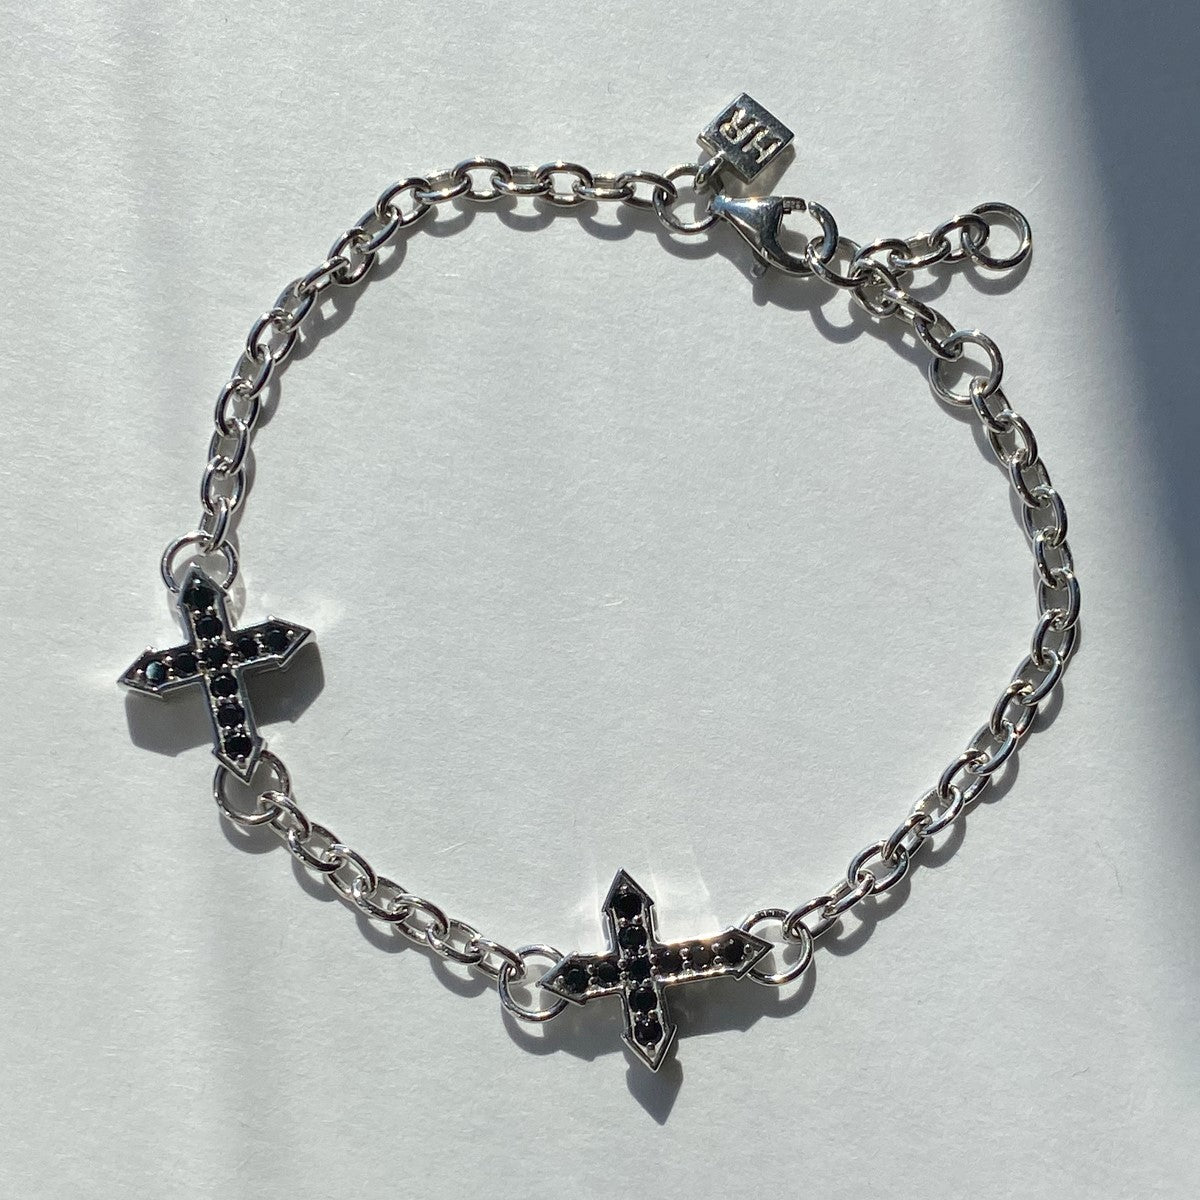 CHAIN BRACELET "TWO CROSSES "GLOW" WITH BLACK SPINEL / SILVER